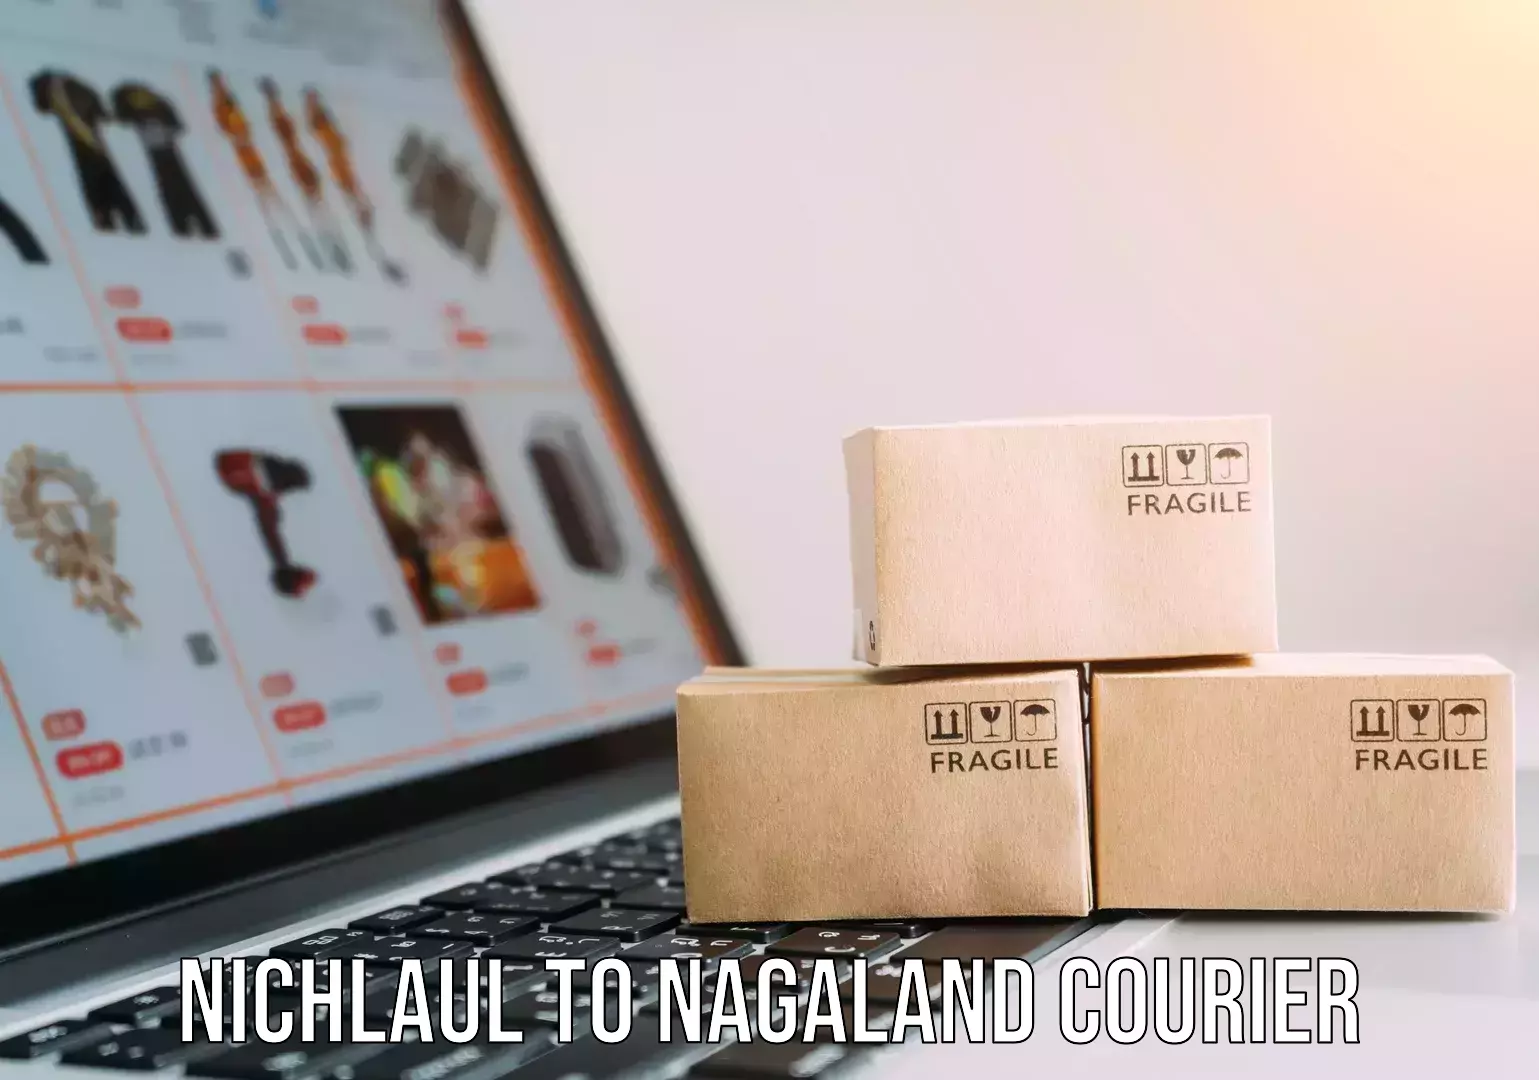 Quality moving and storage Nichlaul to Nagaland